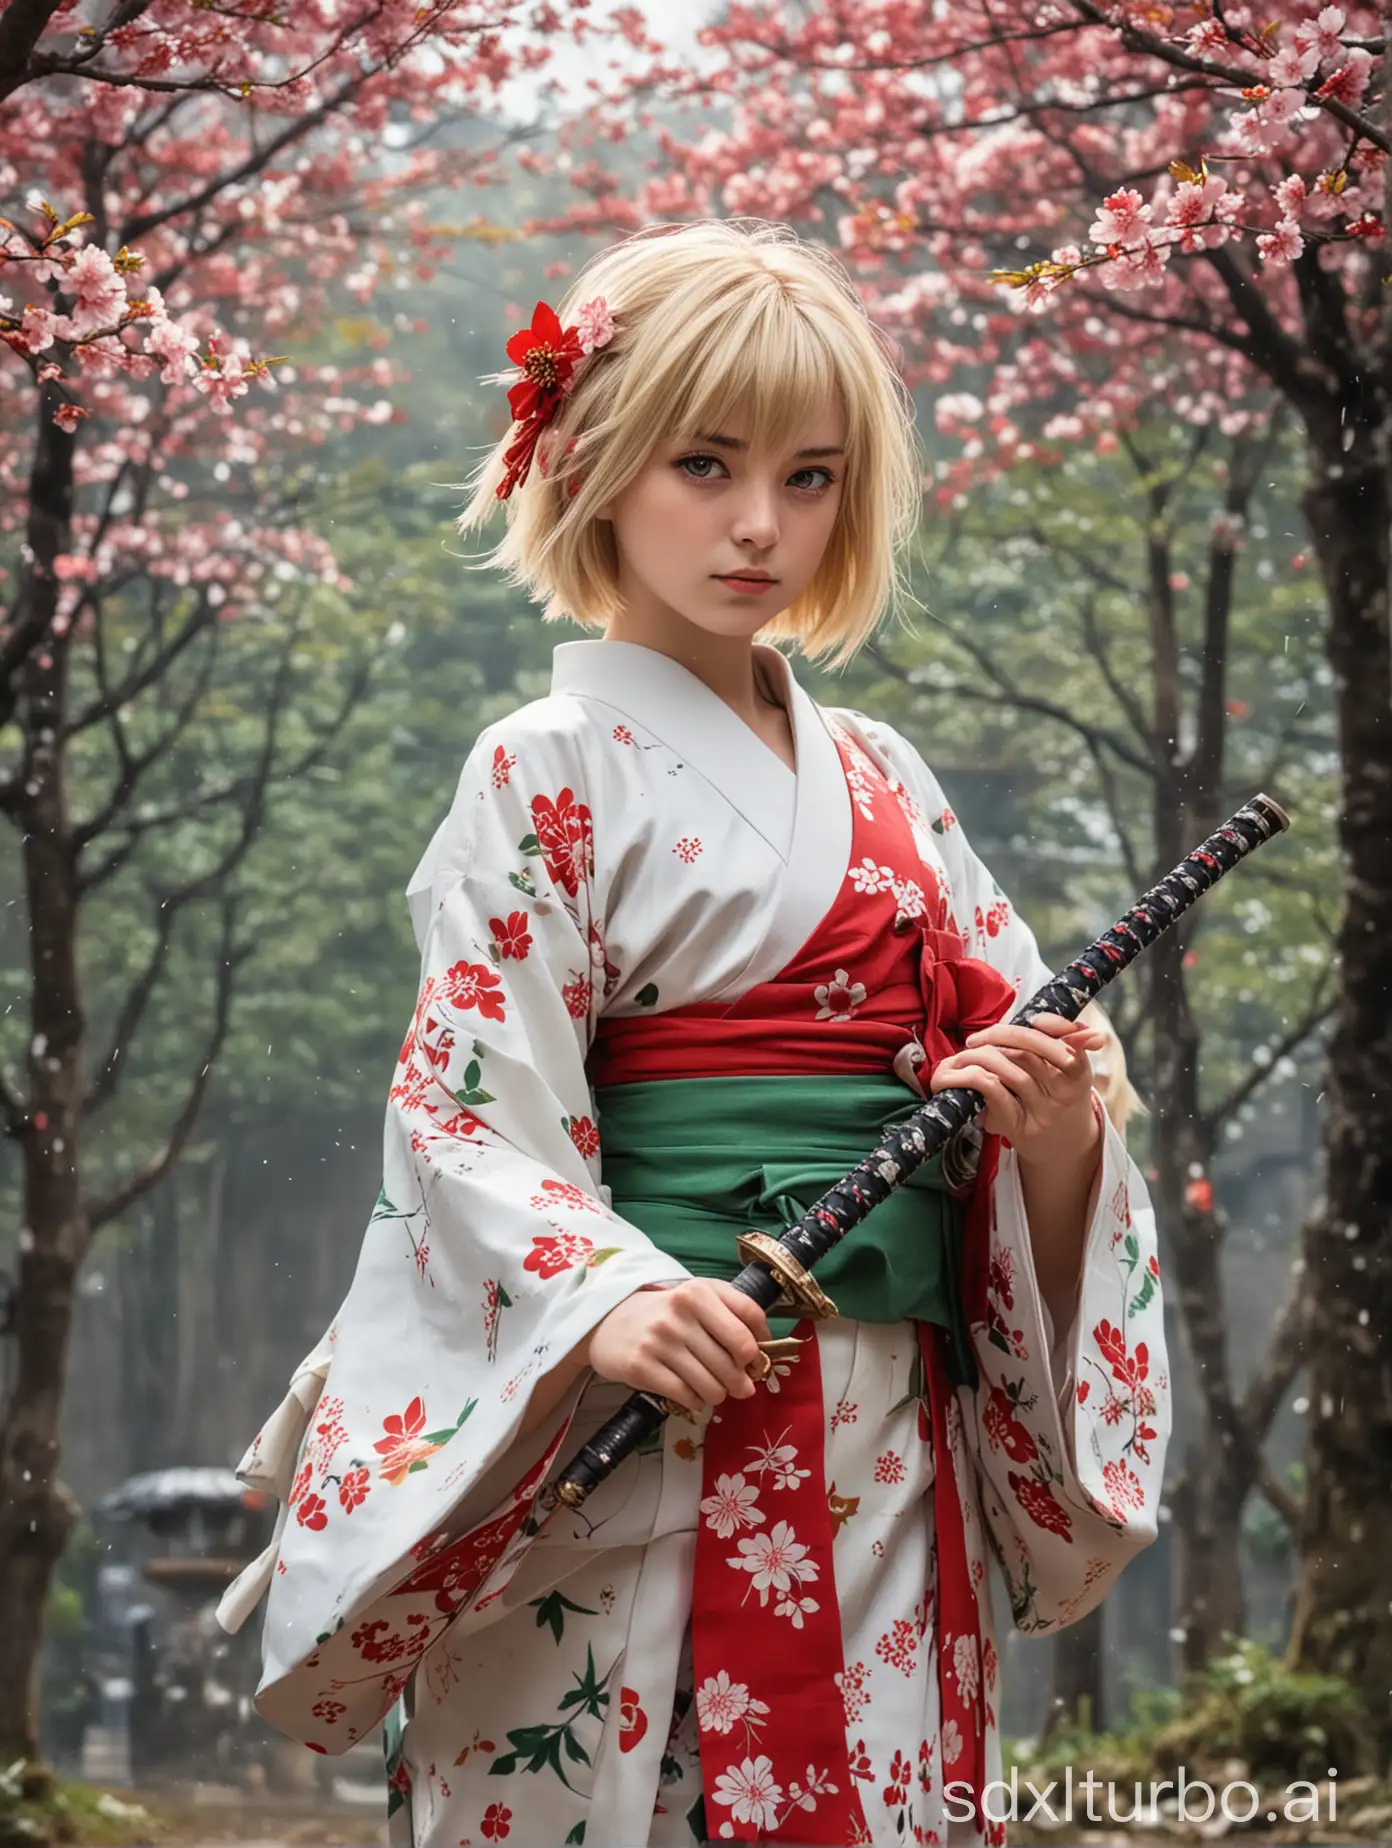 Blonde-Girl-in-Traditional-Kimono-Holding-Katana-with-Floral-Accents